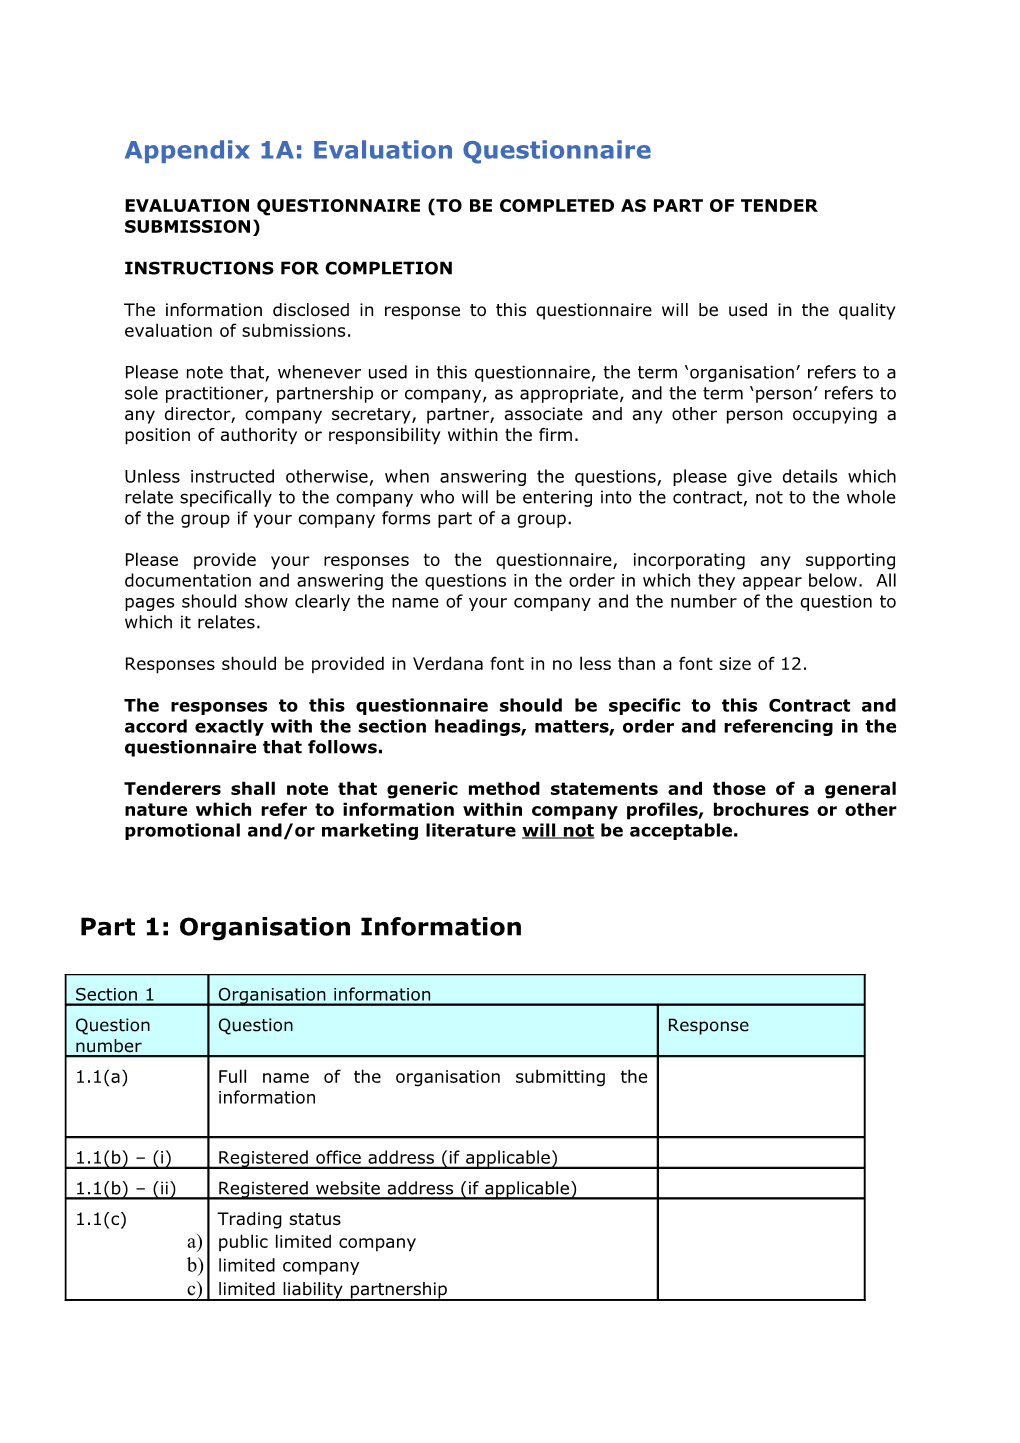 Evaluation Questionnaire (To Be Completed As Part of Tender Submission)